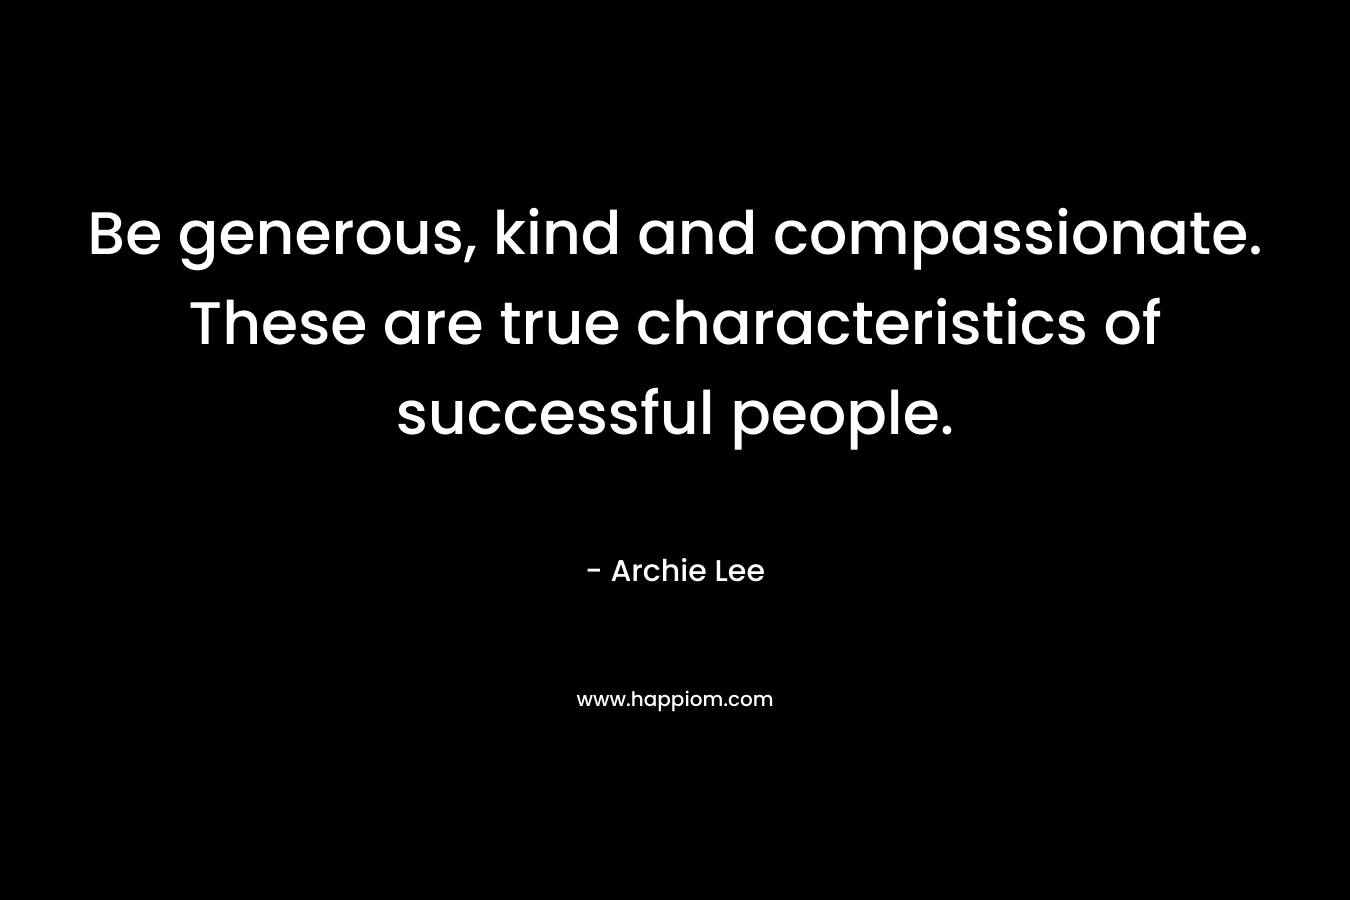 Be generous, kind and compassionate. These are true characteristics of successful people.